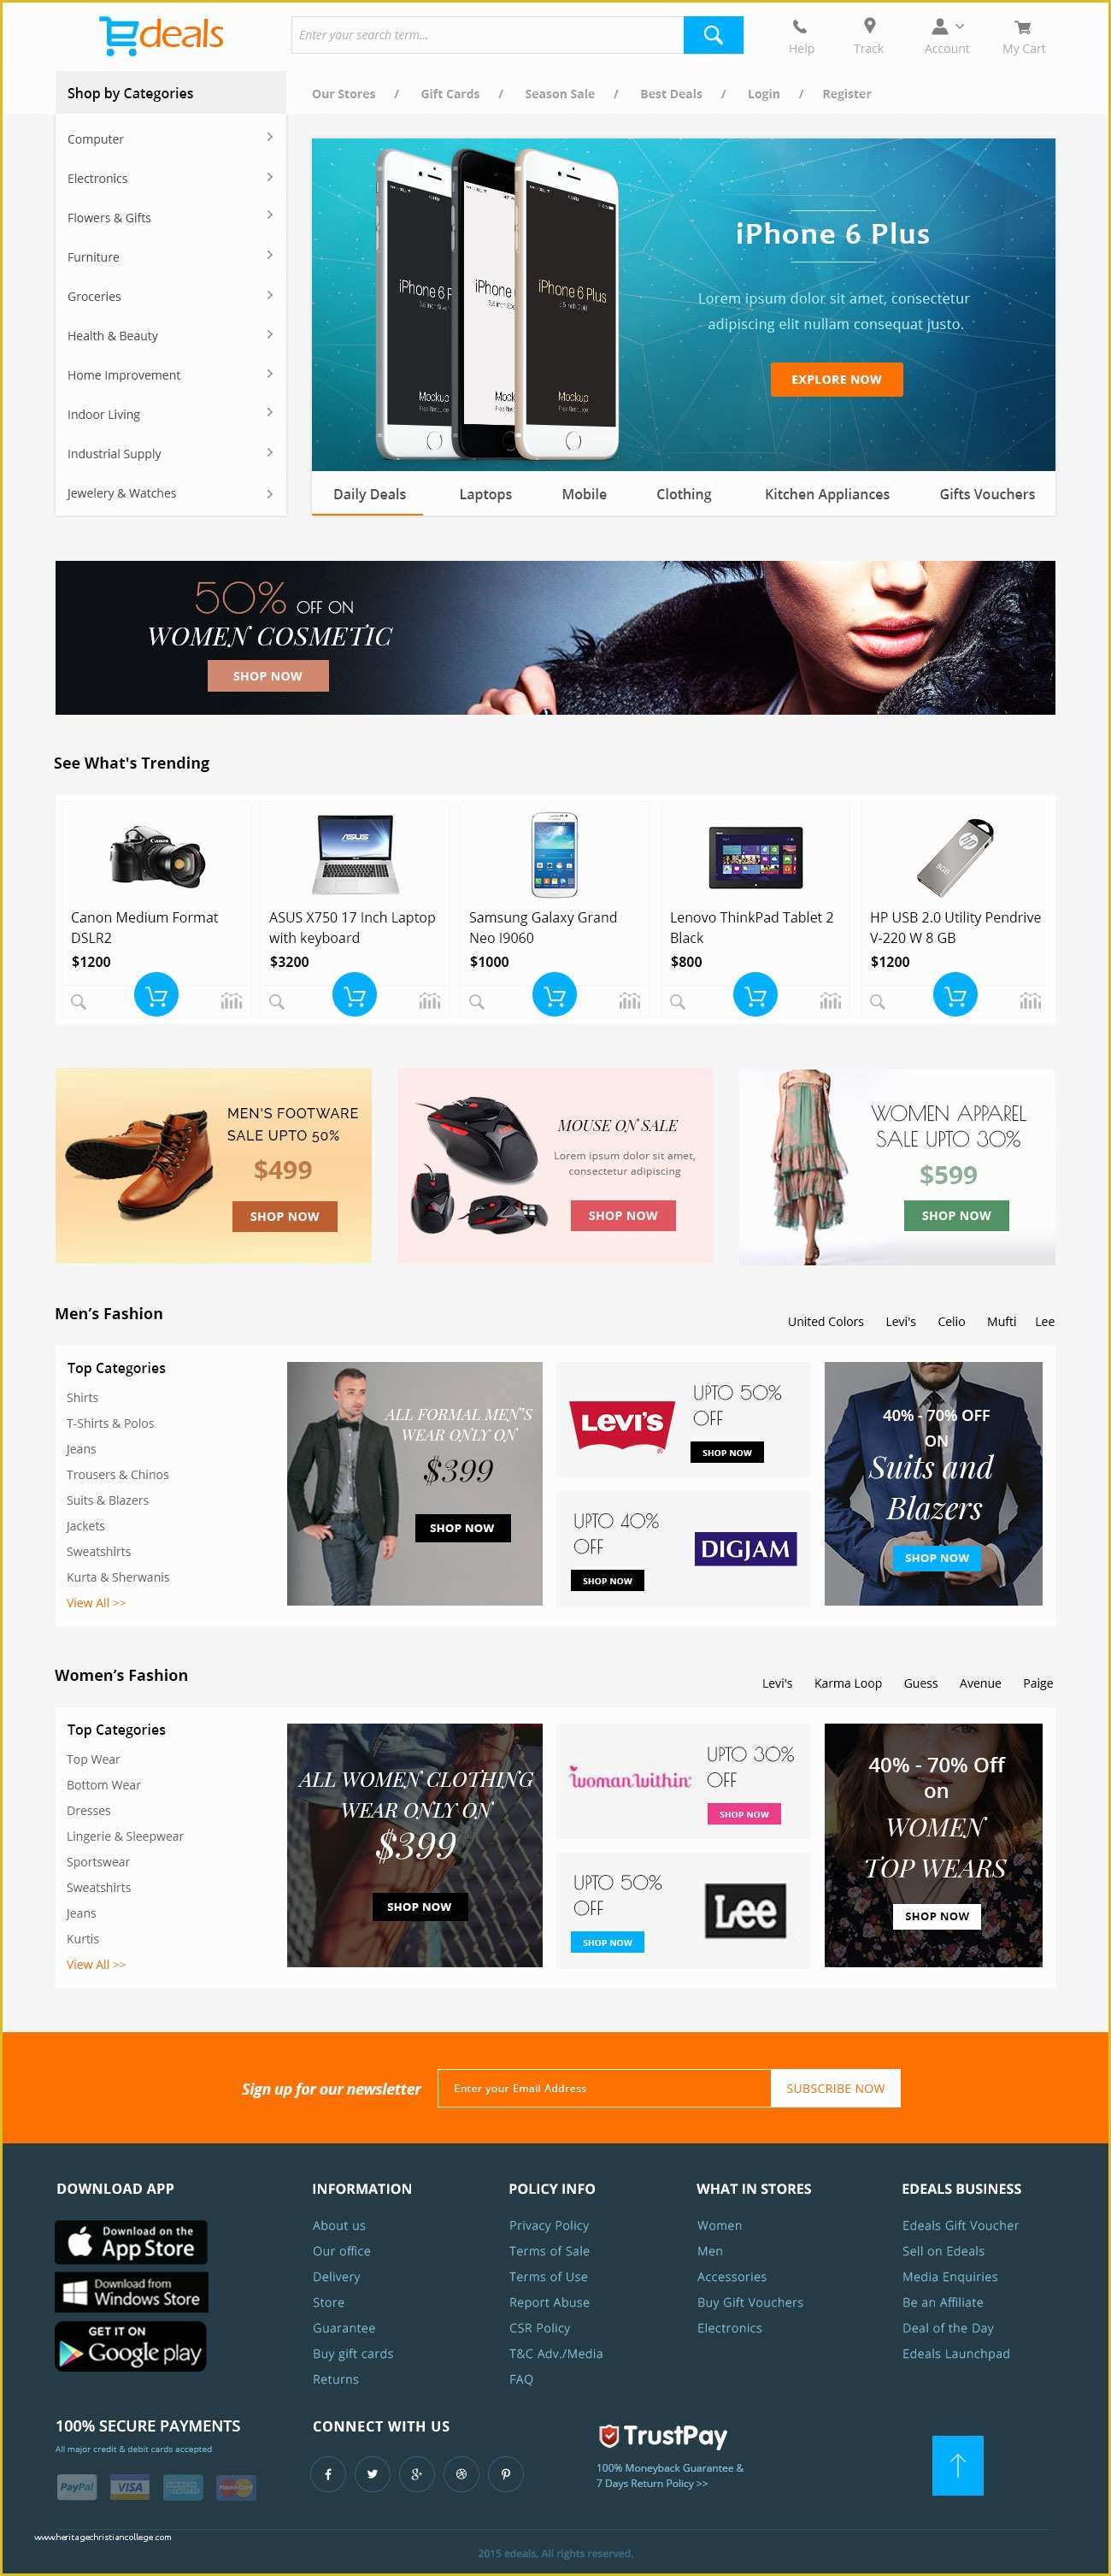 Online Shopping Templates Free Download In PHP Of Free Psd Of Edeals Line Shopping Template